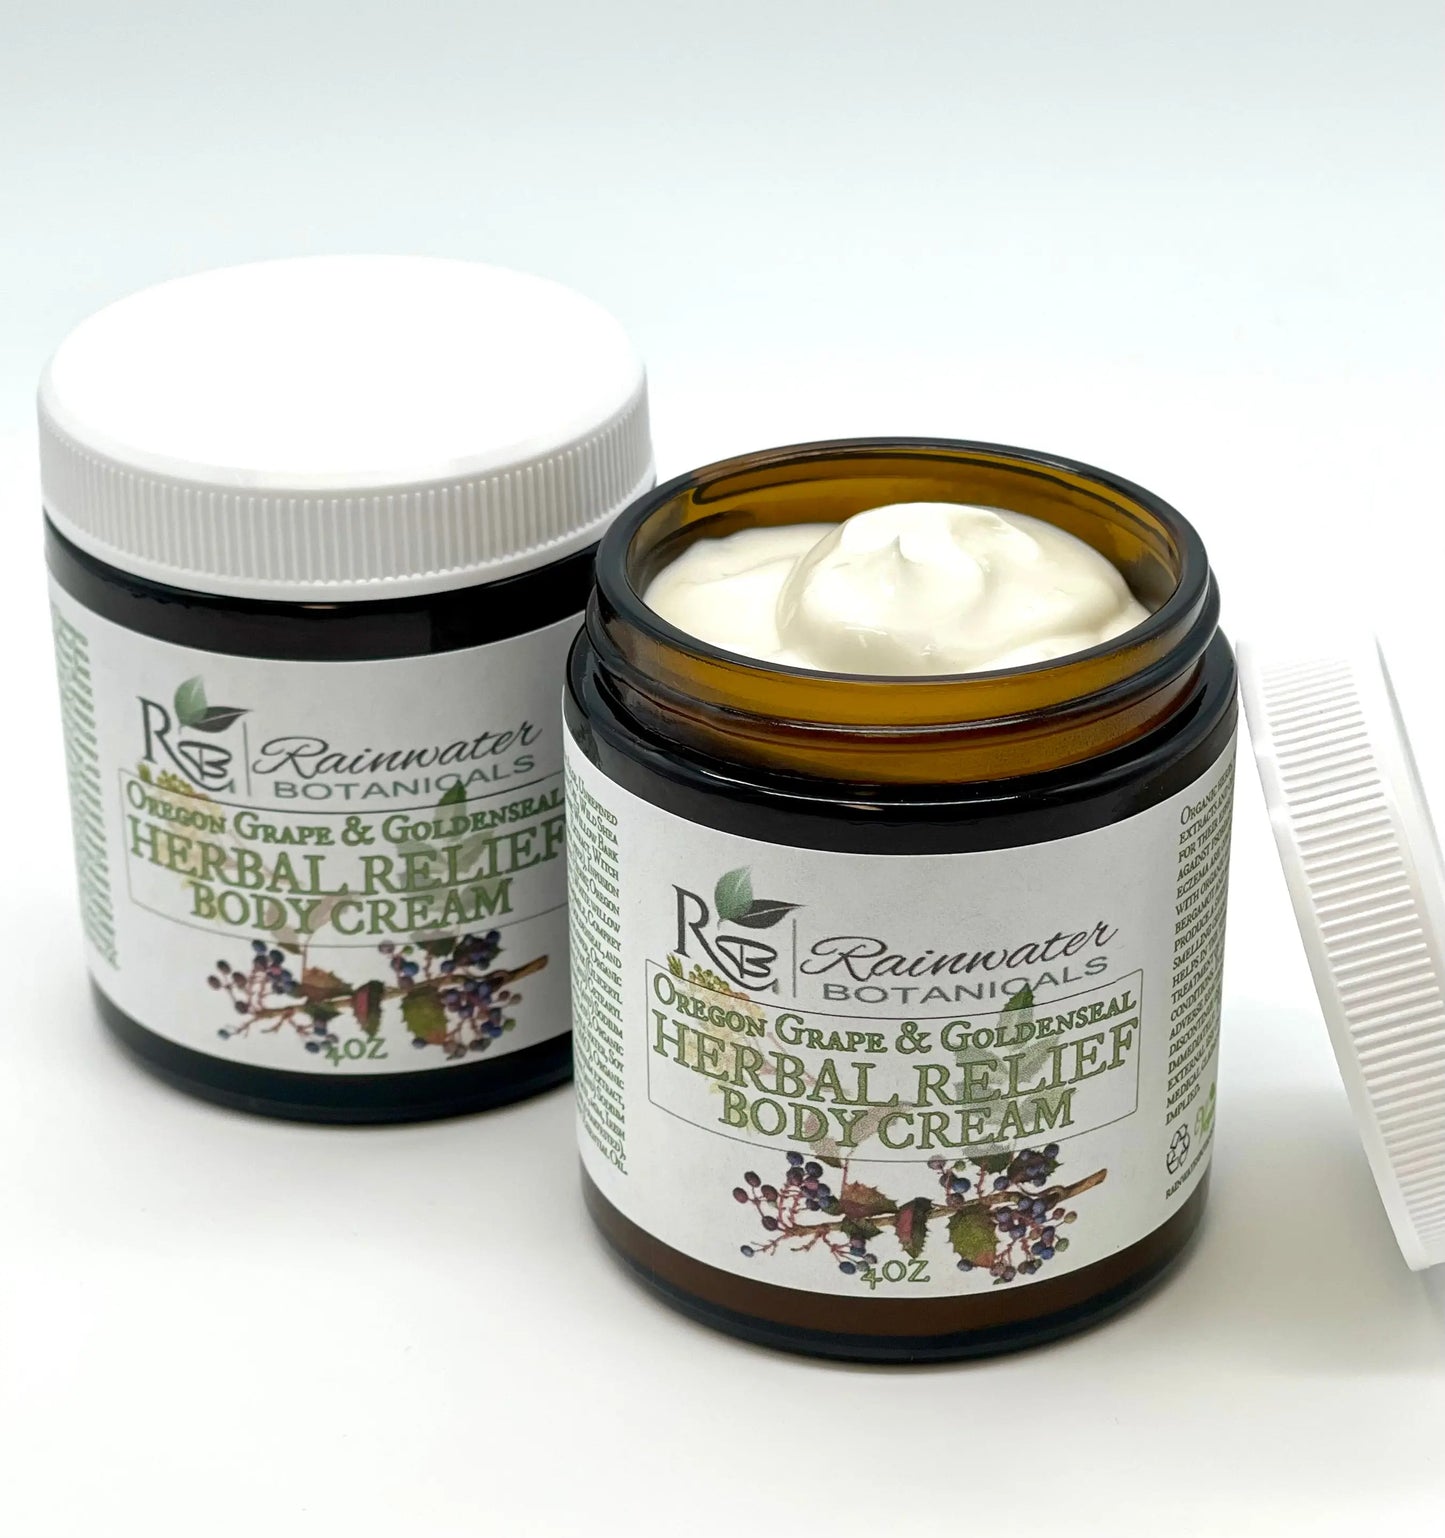 Oregon Grape Root and Golden Seal Herbal Relief Cream For Dry Itchy Skin Rainwater Botanicals